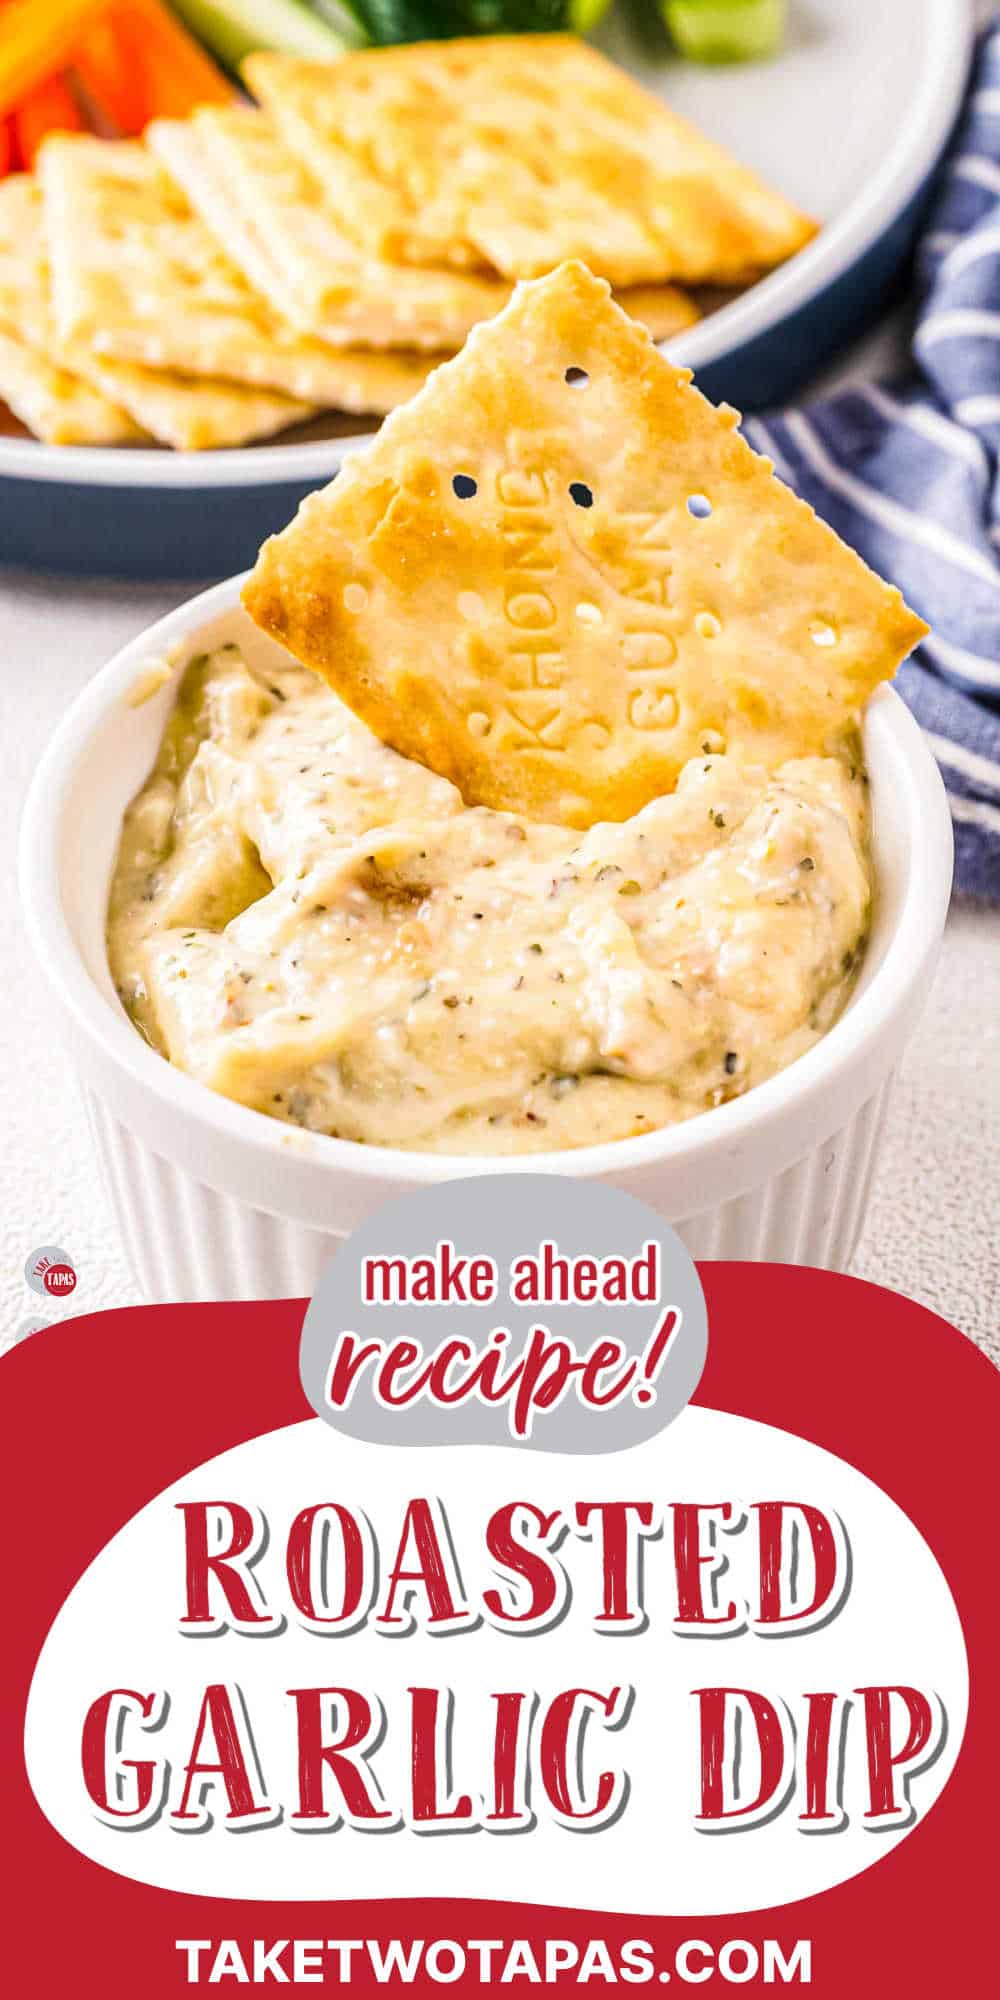 creamy dip with roasted garlic and red banner with text